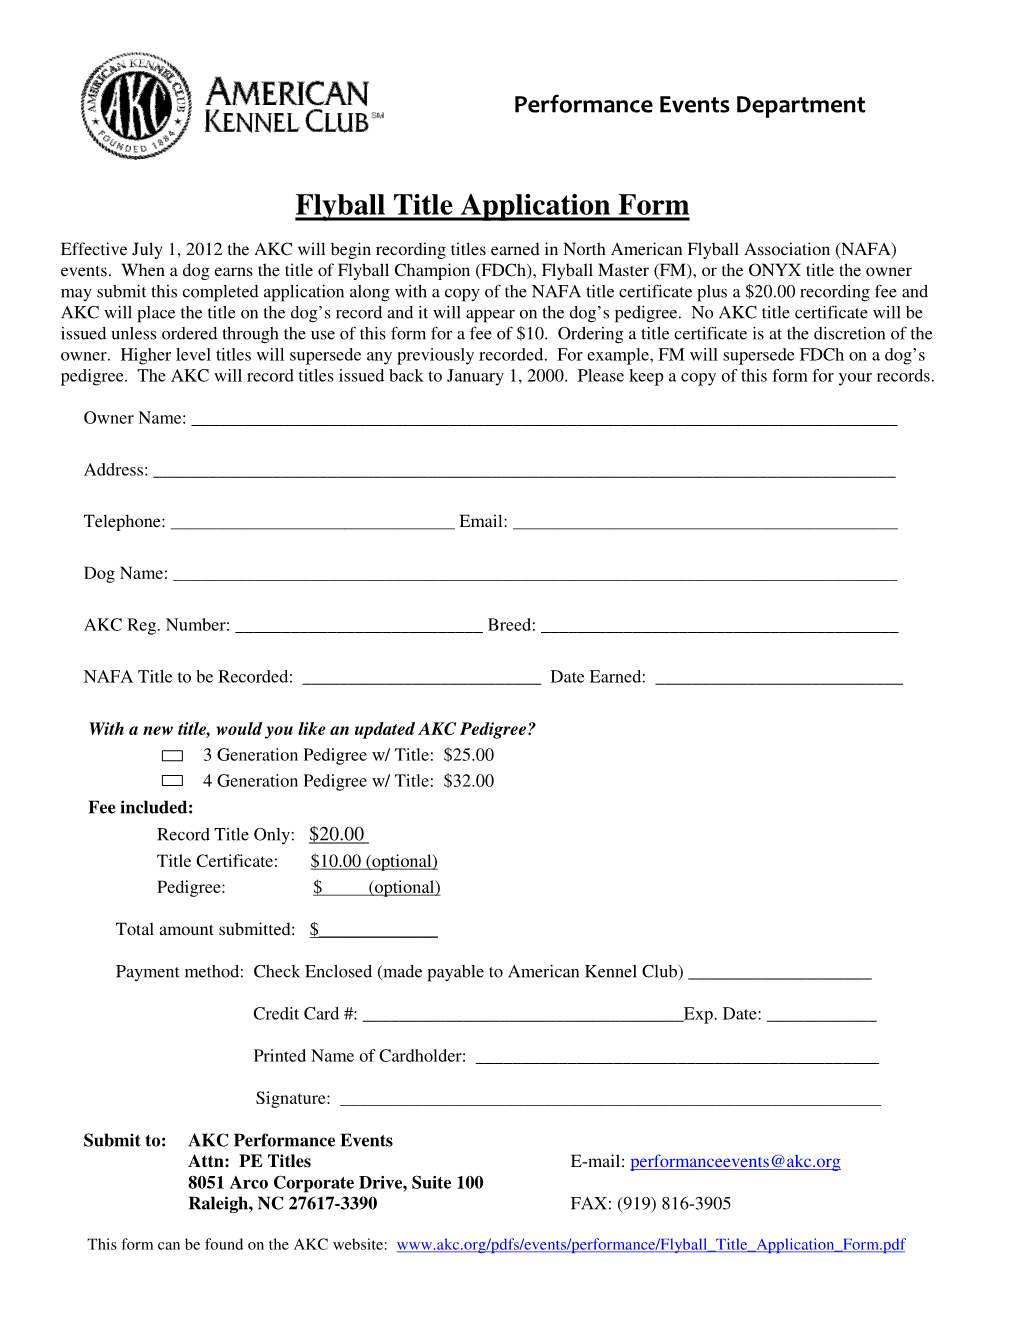 Flyball Title Application Form